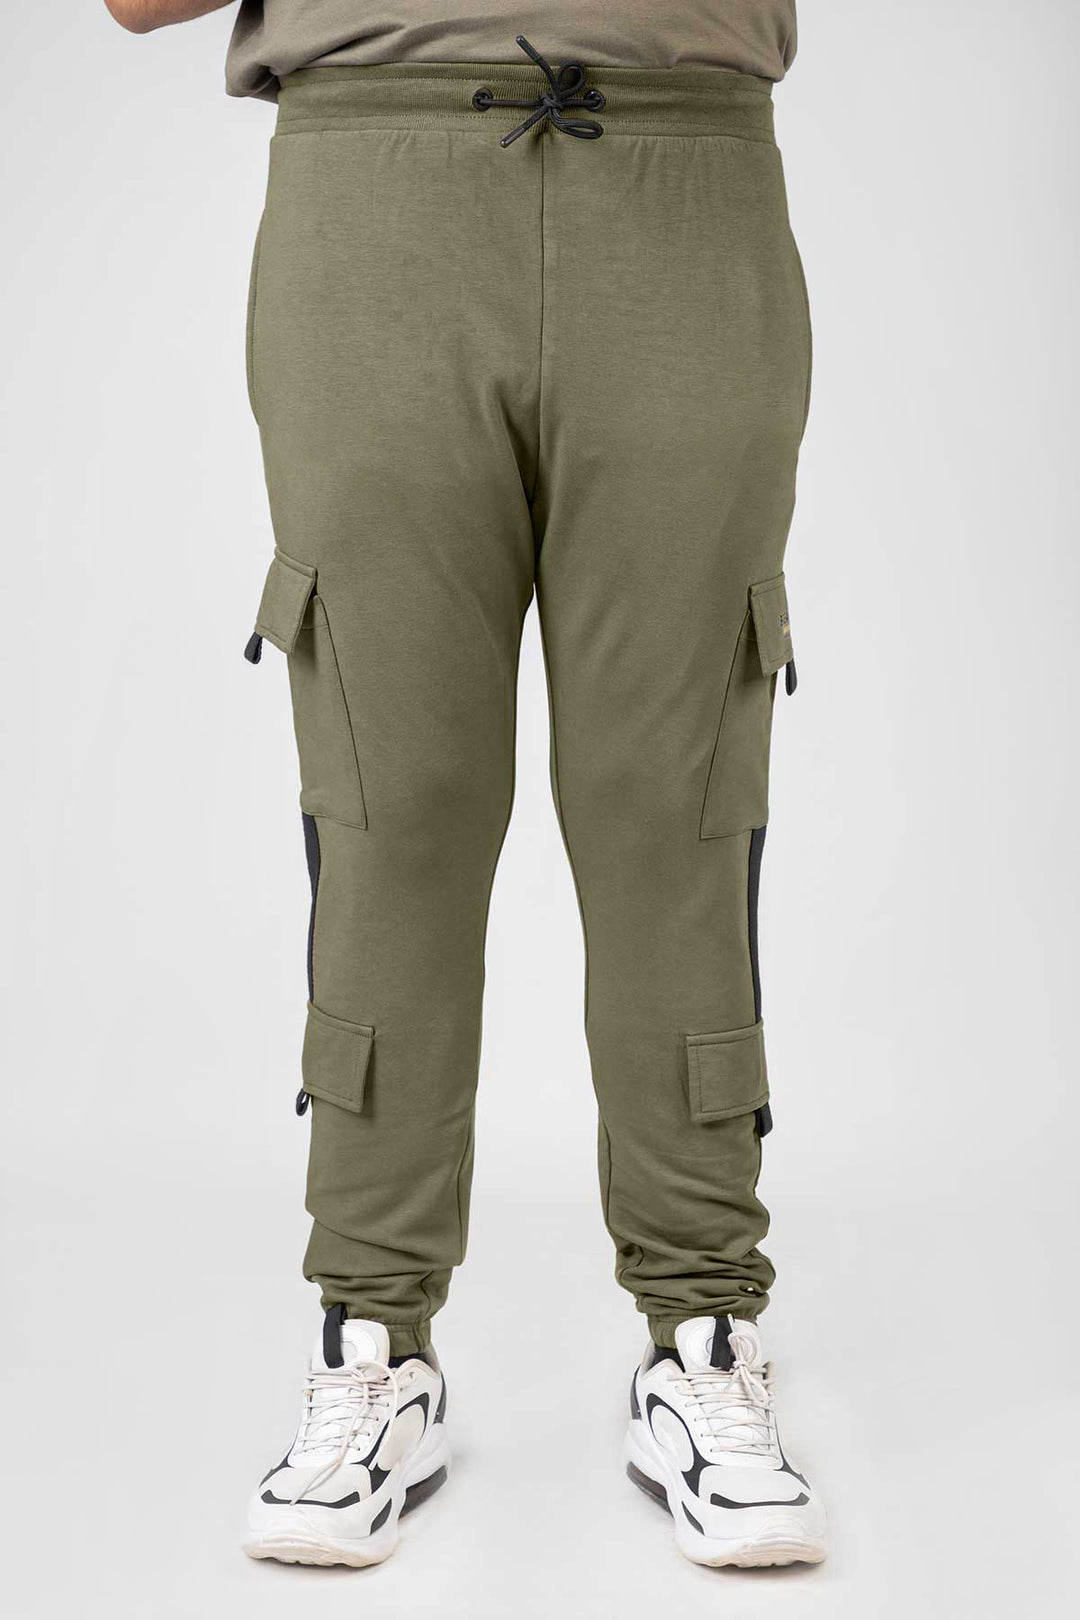 Green Cargo Joggers with Drawstring Closure & Pockets (Plus Size) - W23 - MTR097P